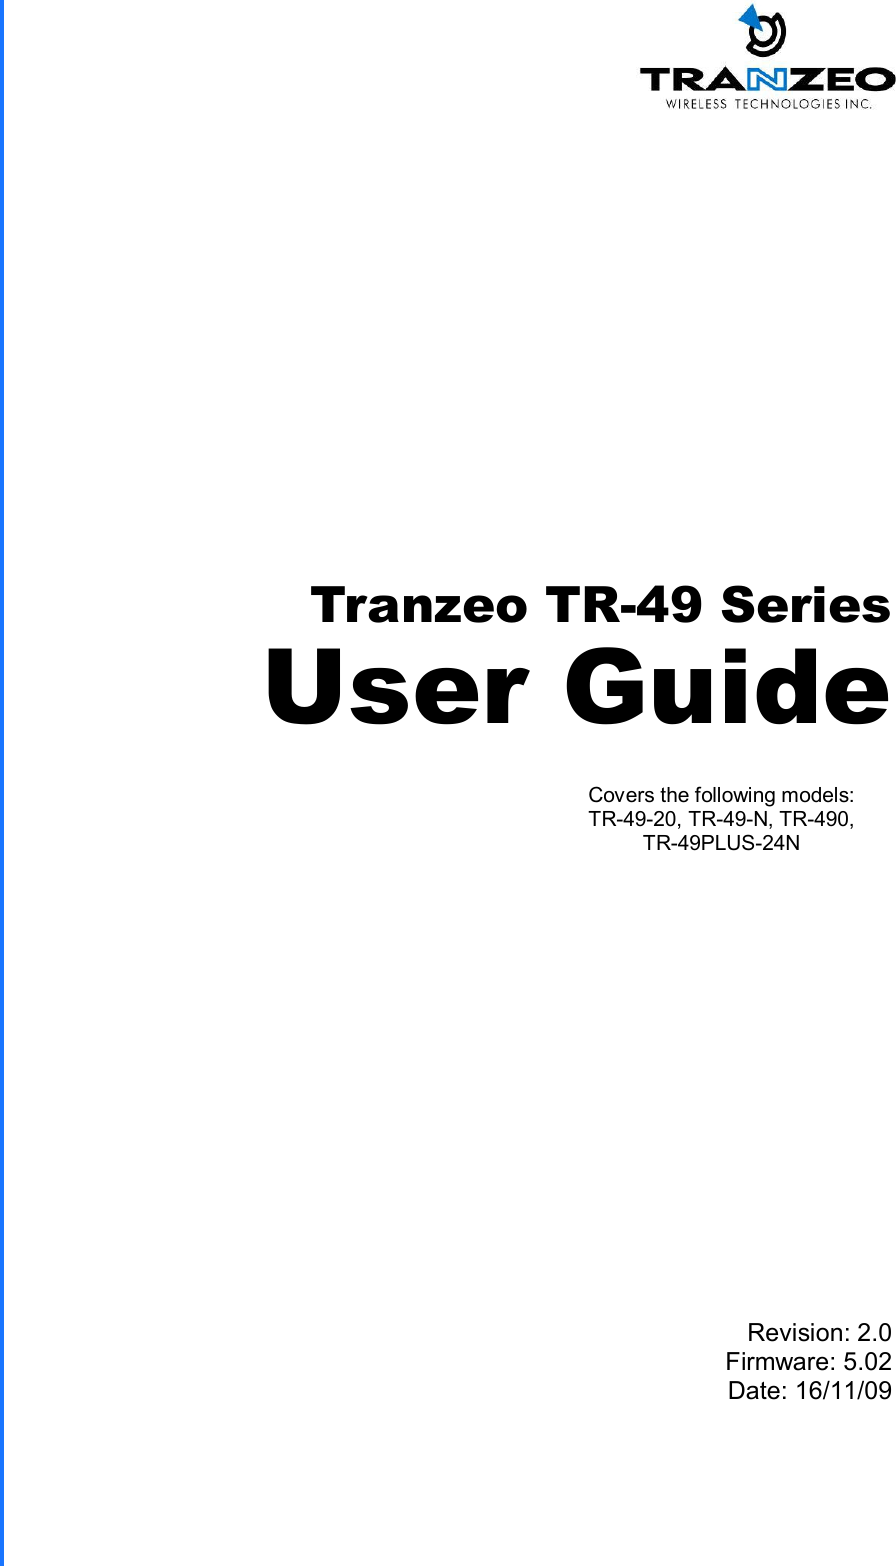  TRANZEO TR-49 Revision: 2.0 Firmware: 5.02 Date: 16/11/09 Tranzeo TR-49 Series User Guide Covers the following models:   TR-49-20, TR-49-N, TR-490, TR-49PLUS-24N 